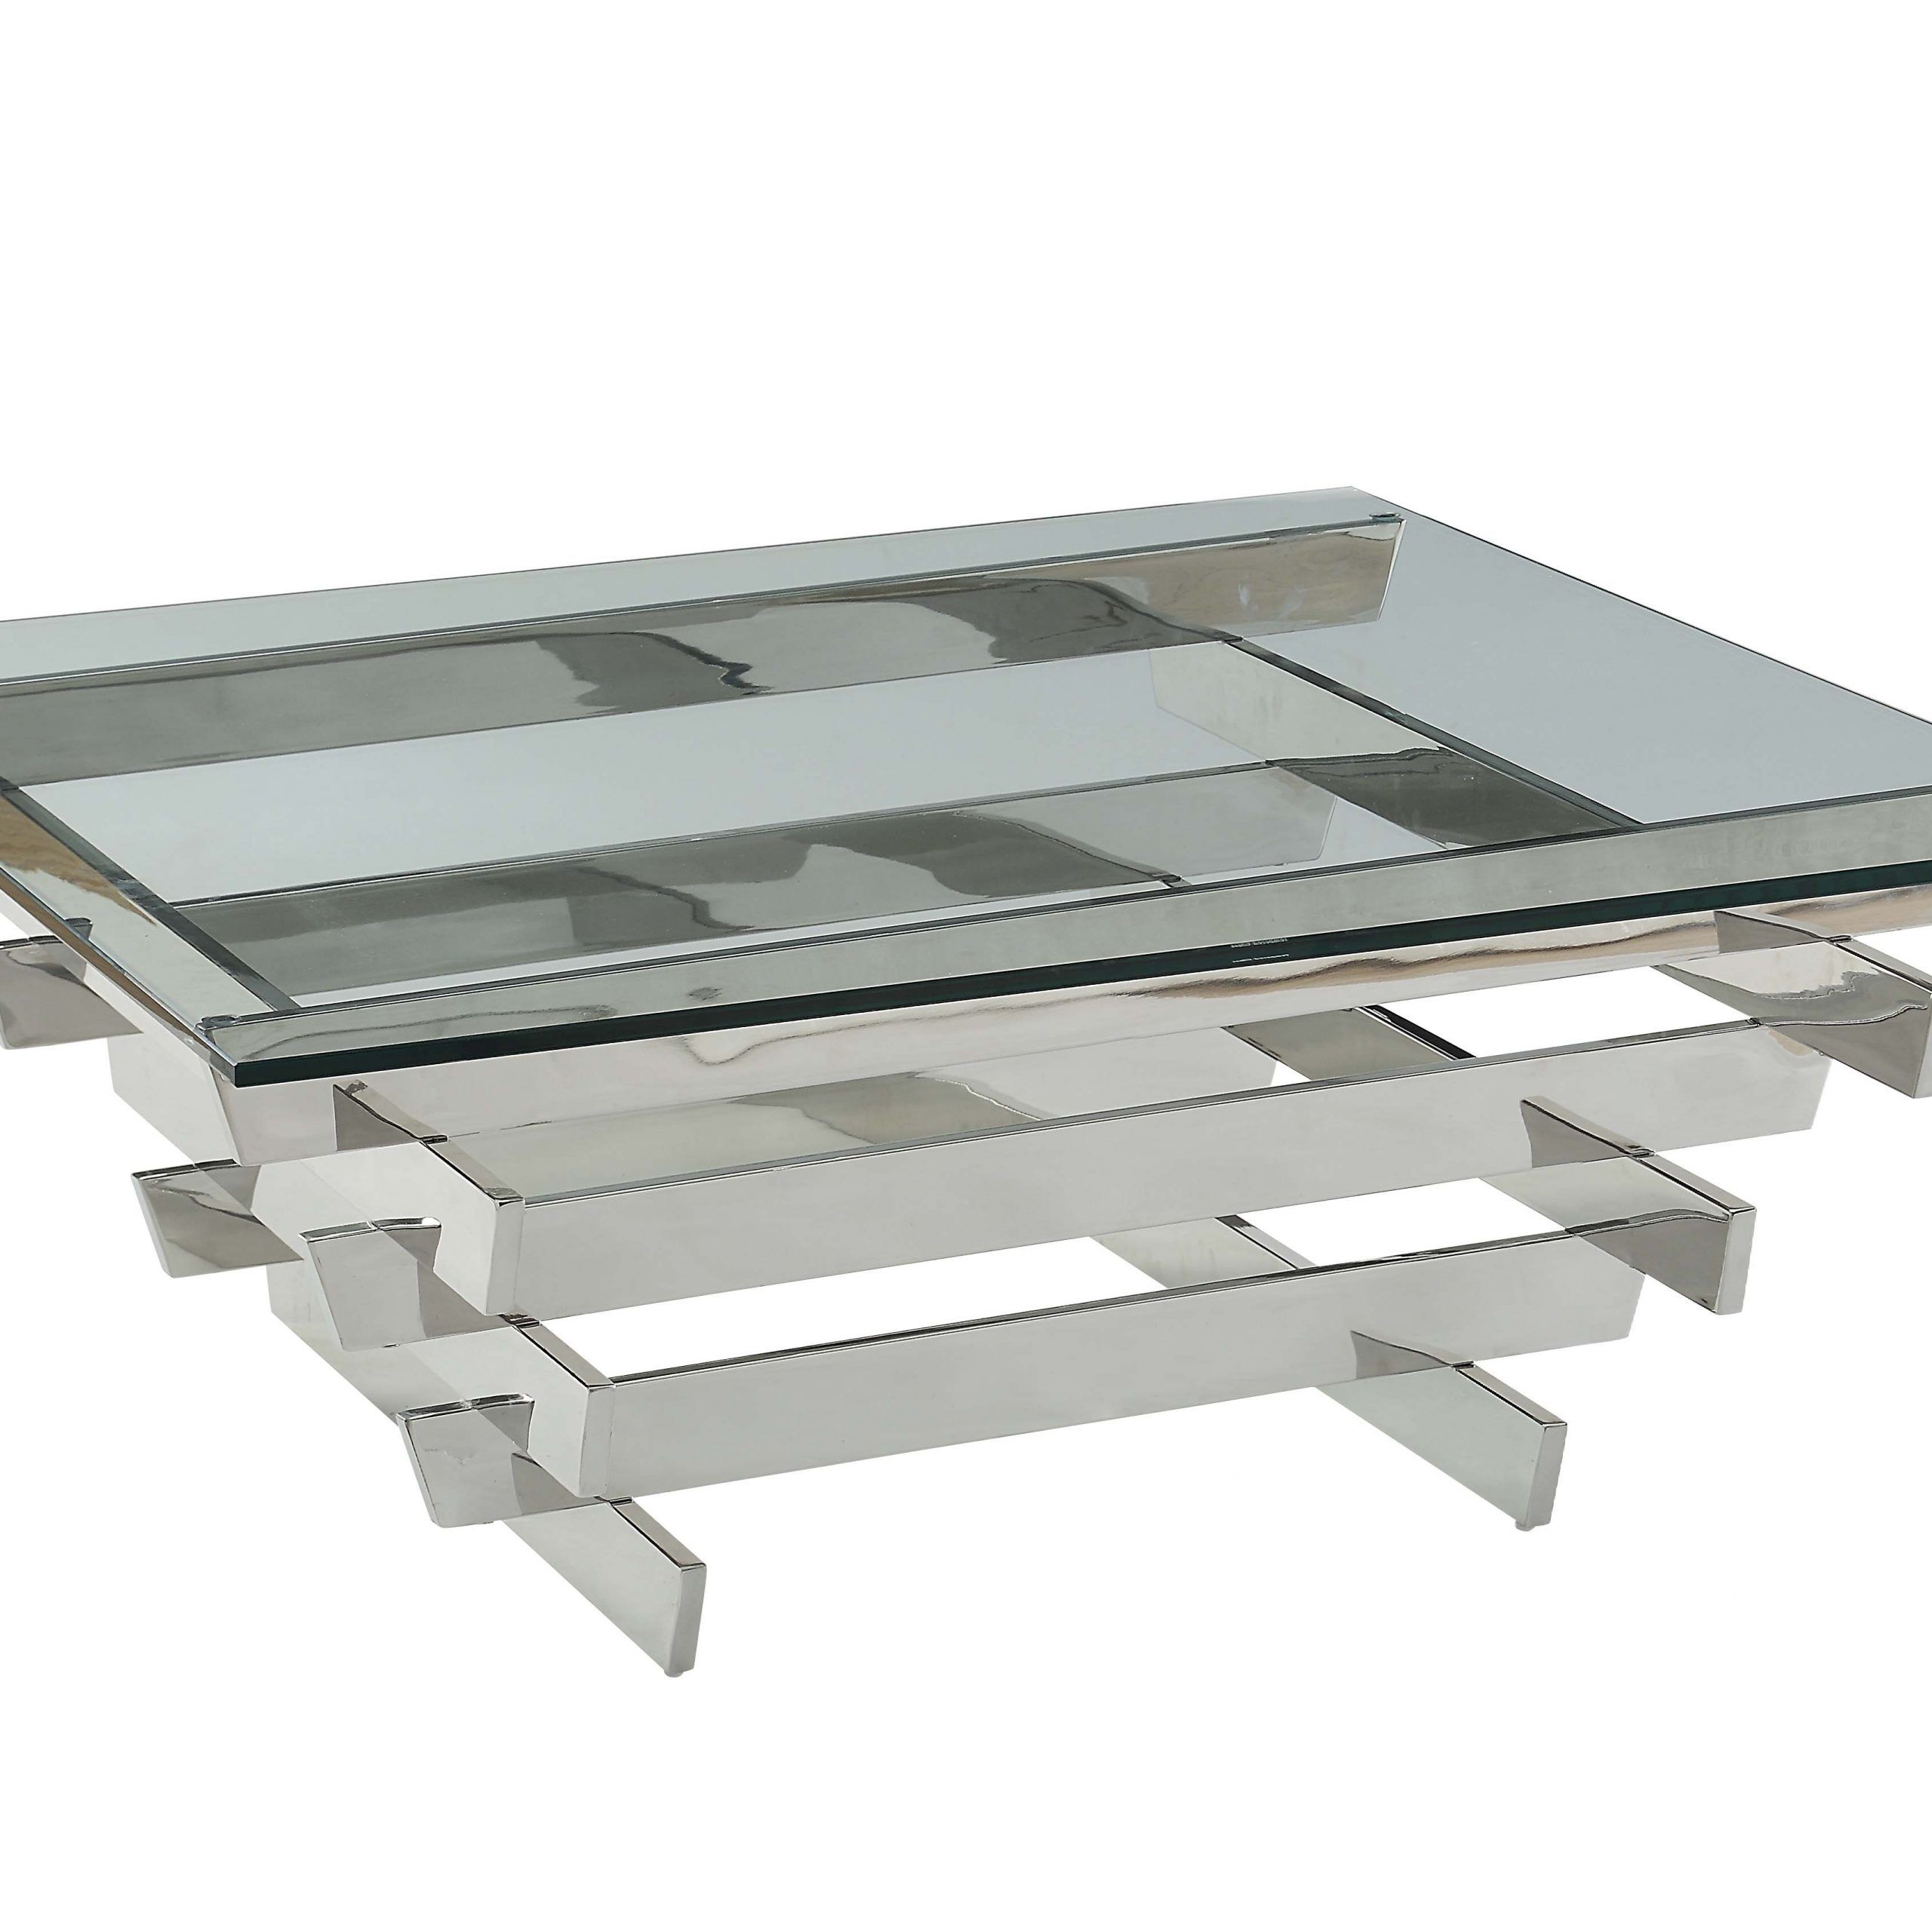 Acme Salonius Glass Coffee Table In Stainless Steel With Regard To 2019 Glass And Stainless Steel Cocktail Tables (View 19 of 20)